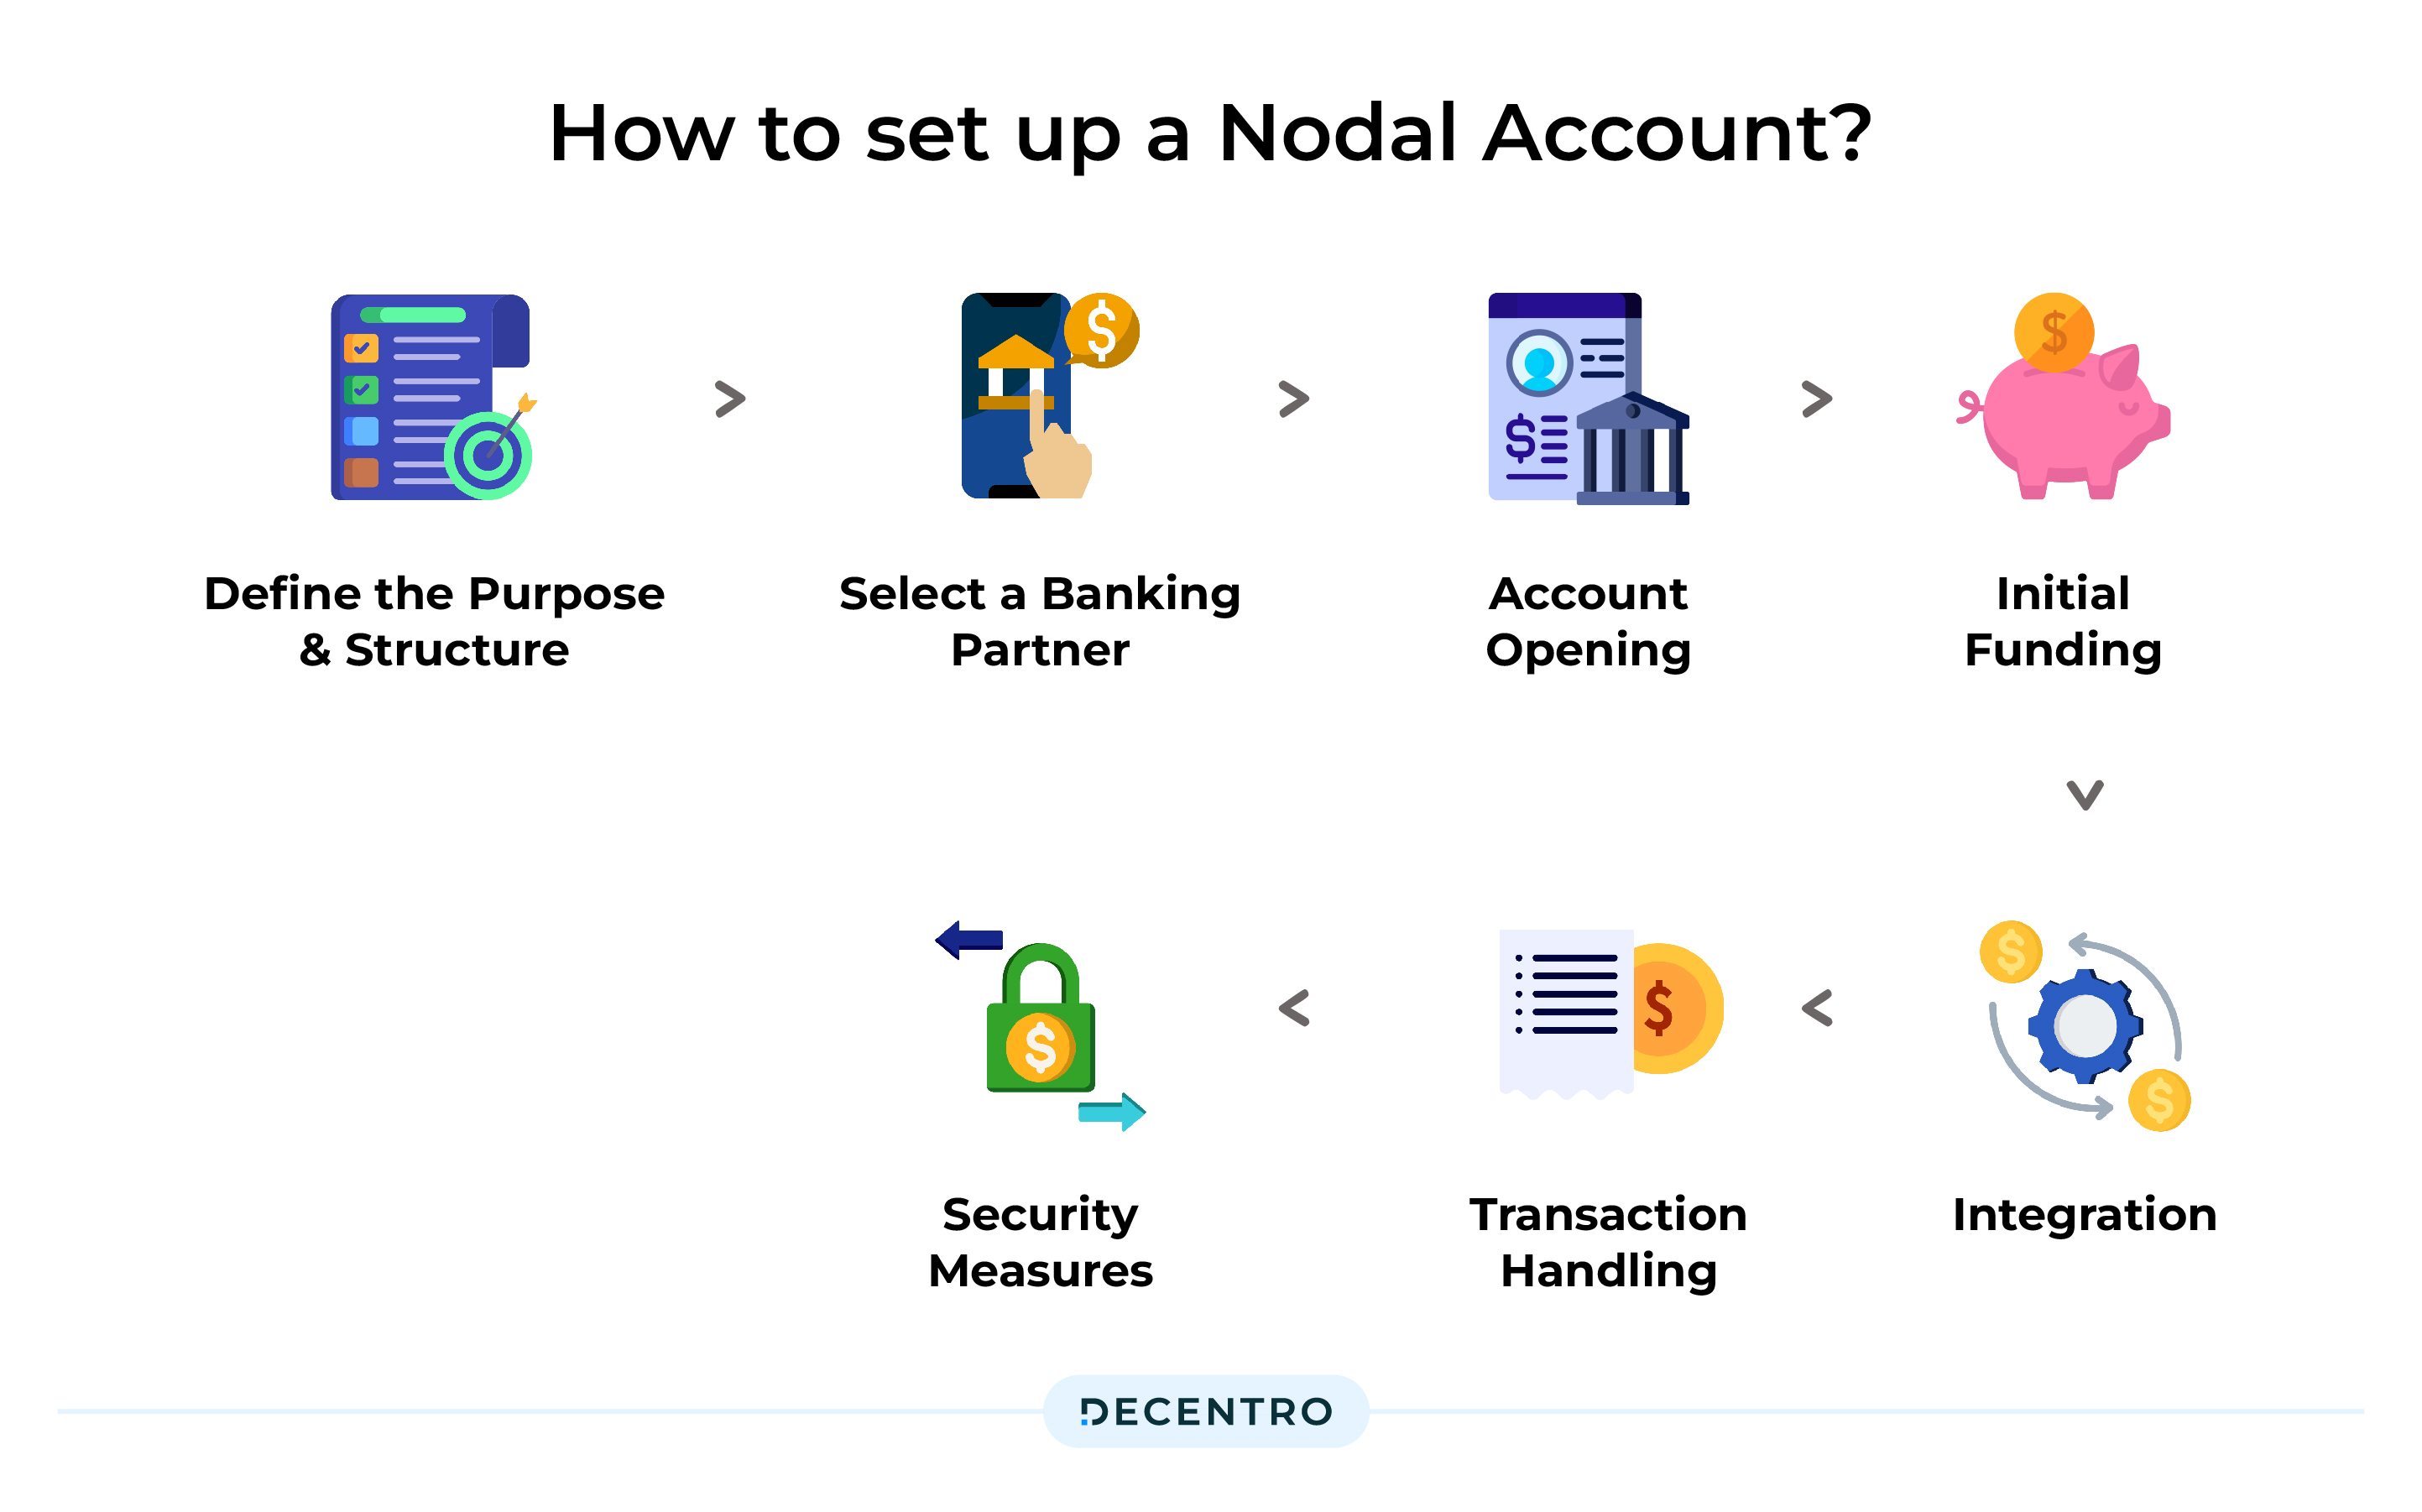 The set-up flow of a Nodal Account